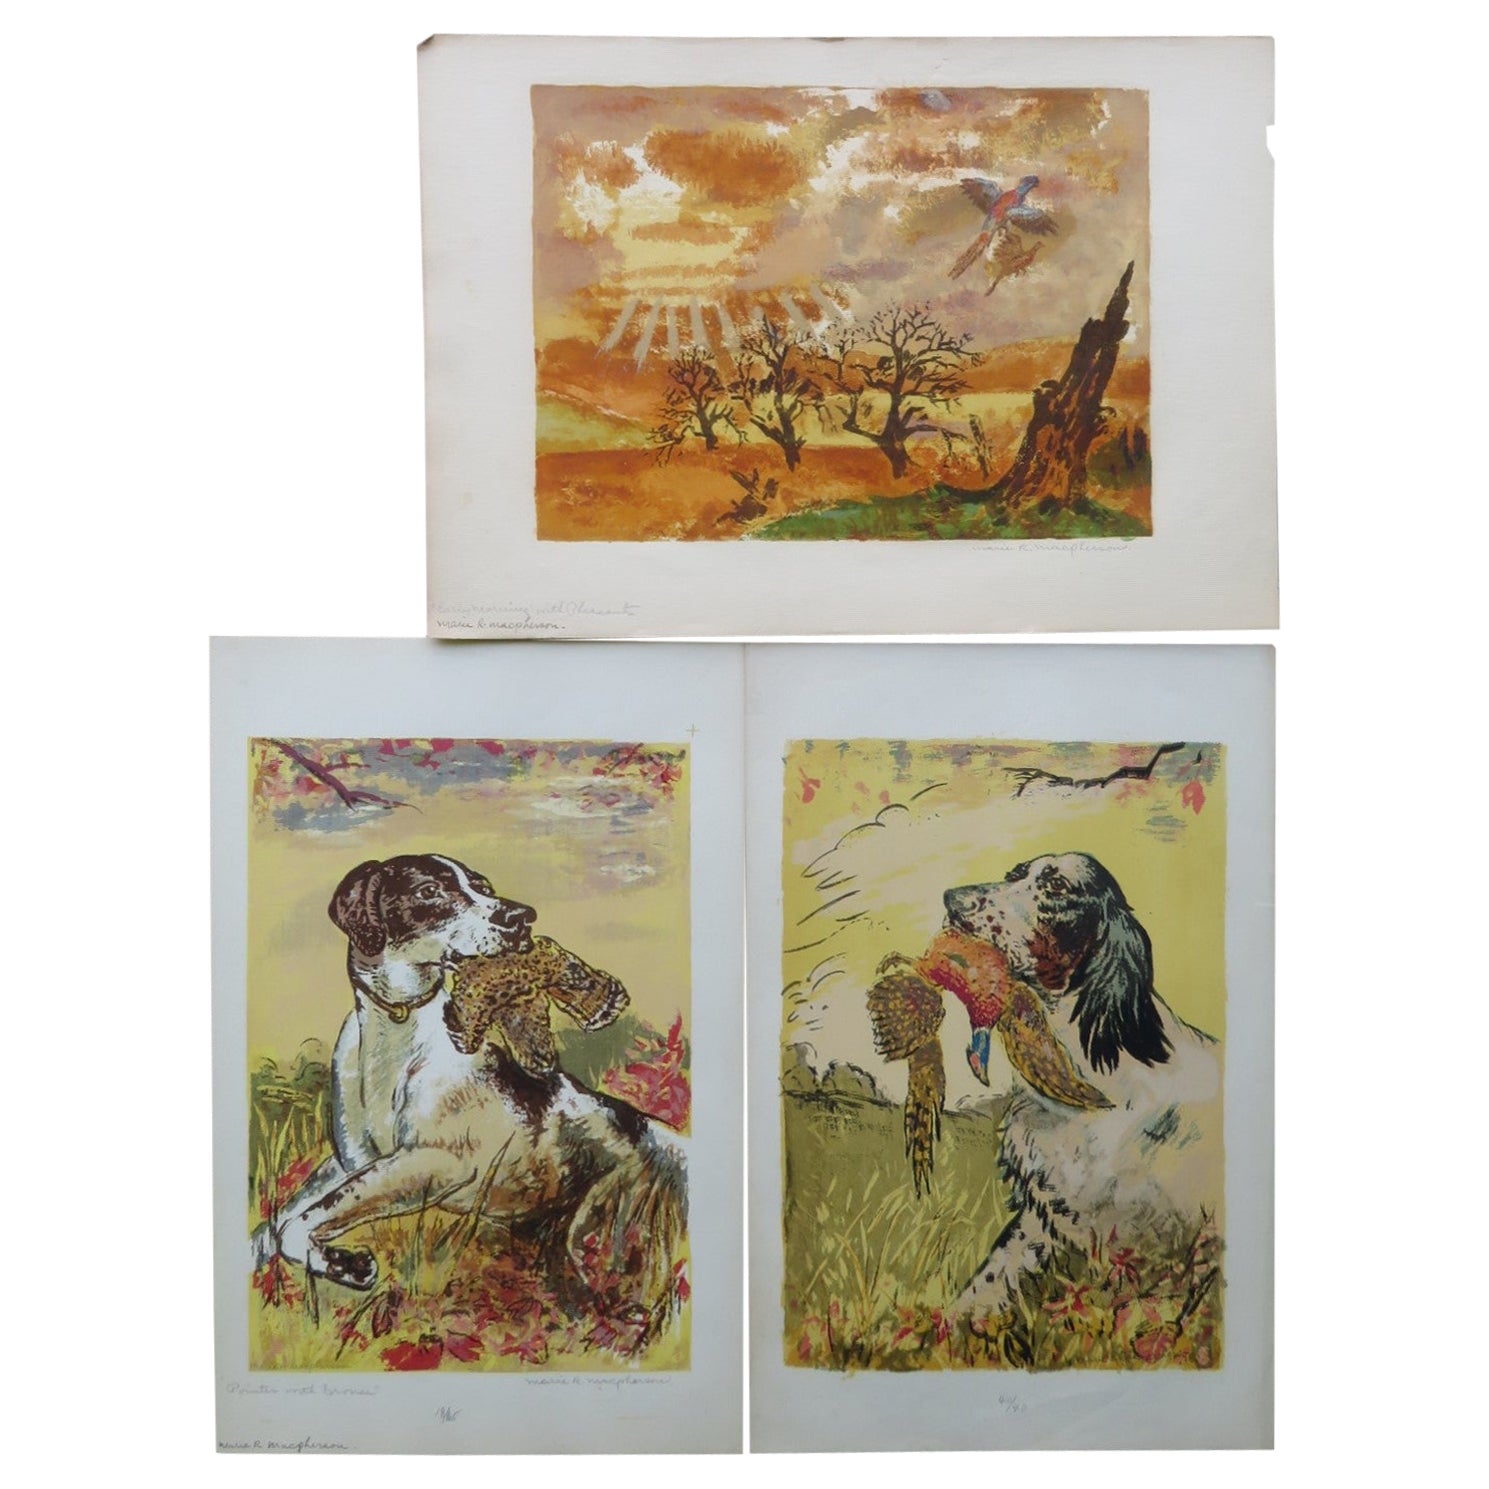 Sporting Dogs and Birds Set of 3 Colored Serigraphs Marie R. MacPherson, 1950s